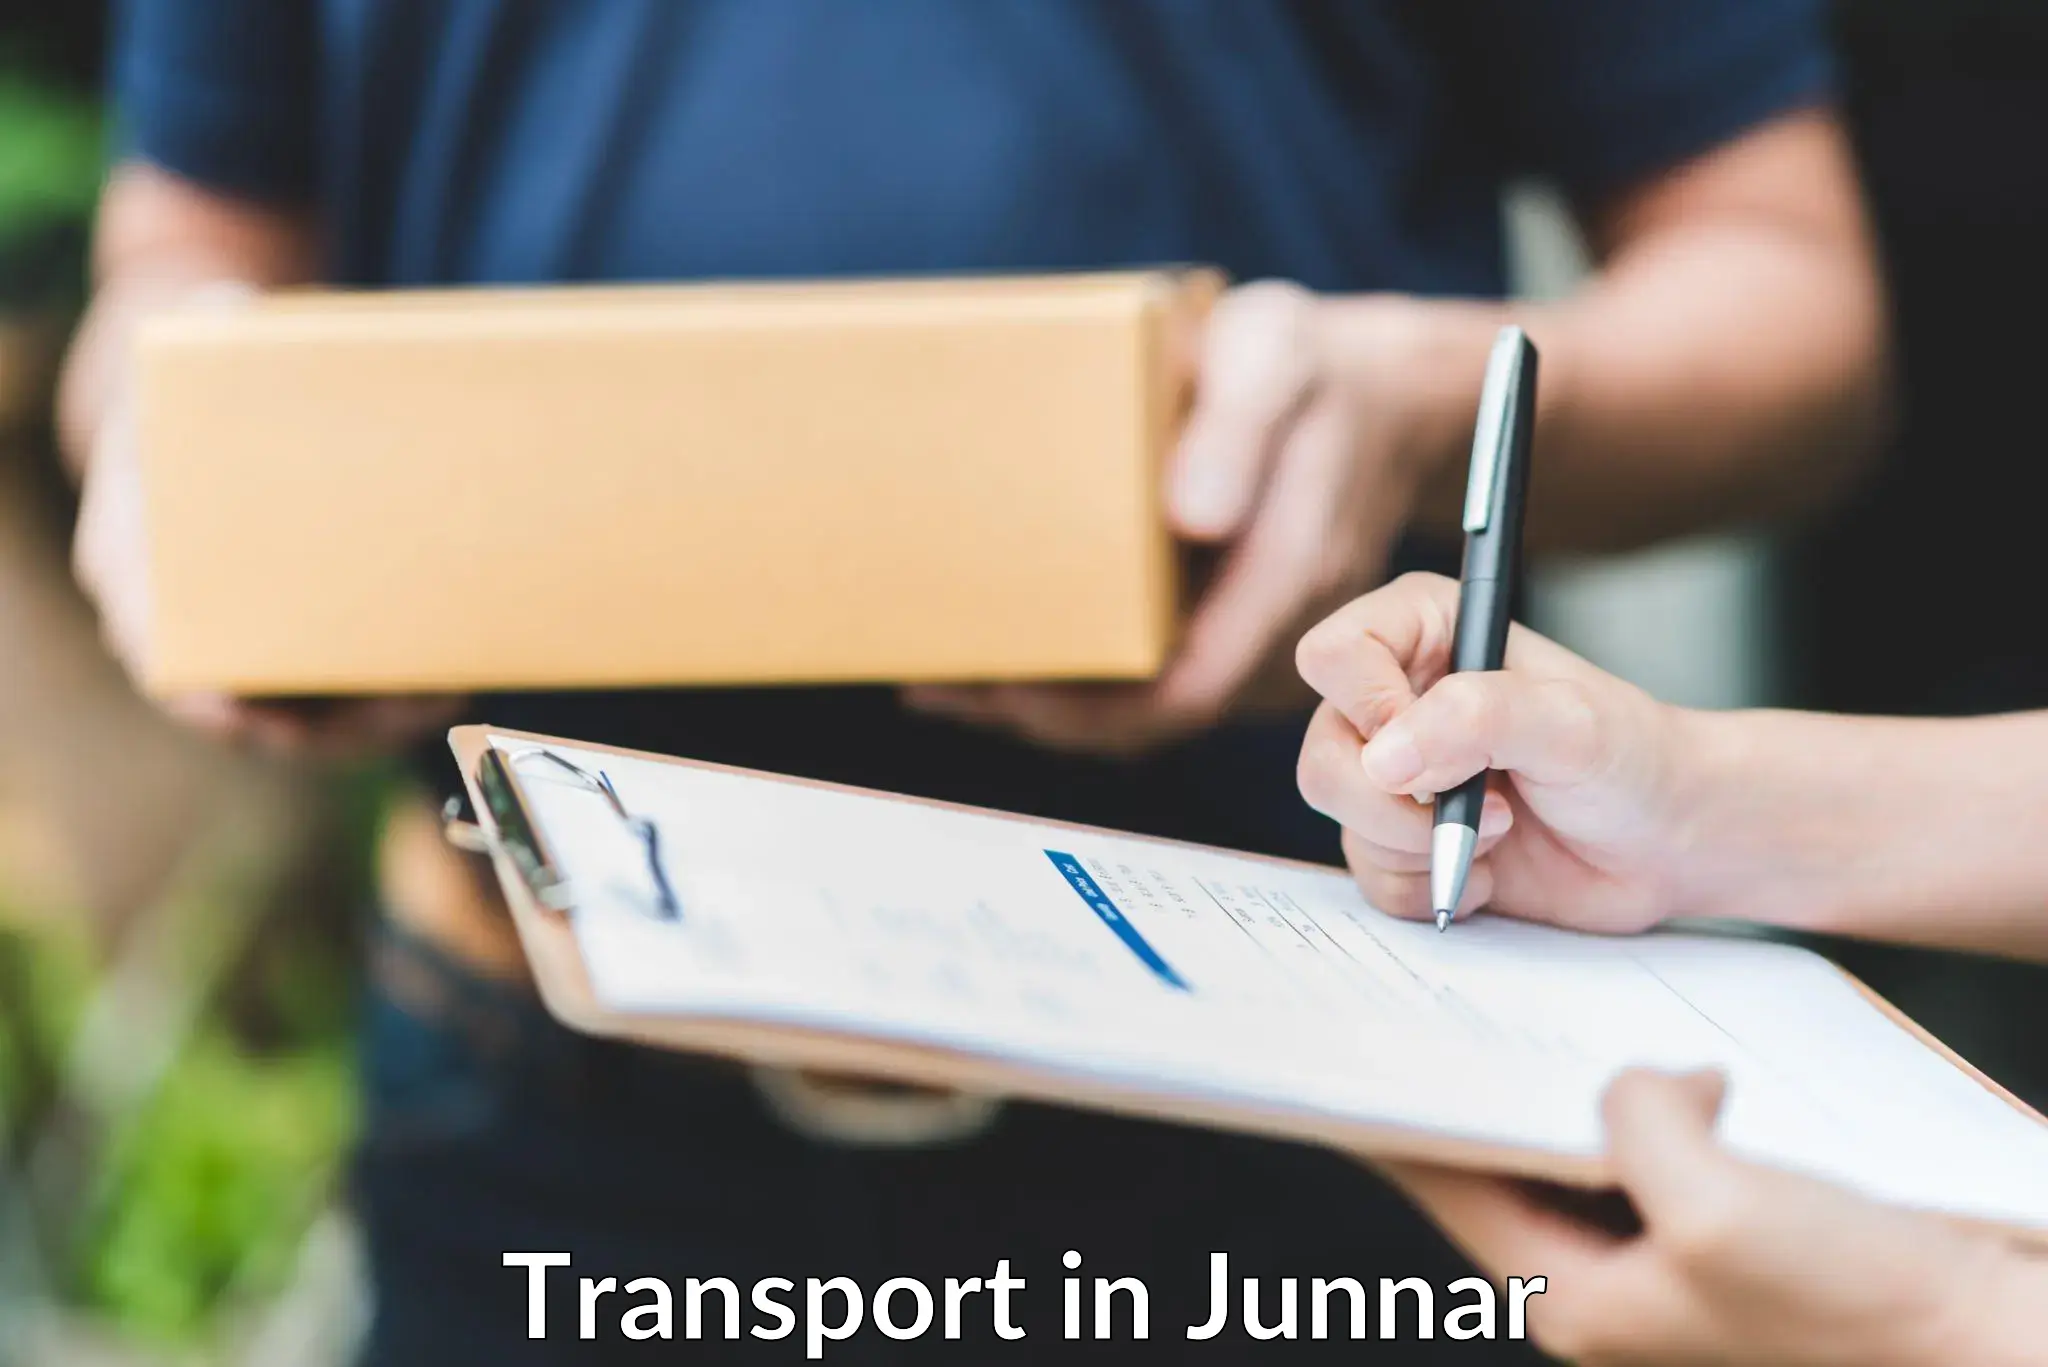 Road transport services in Junnar